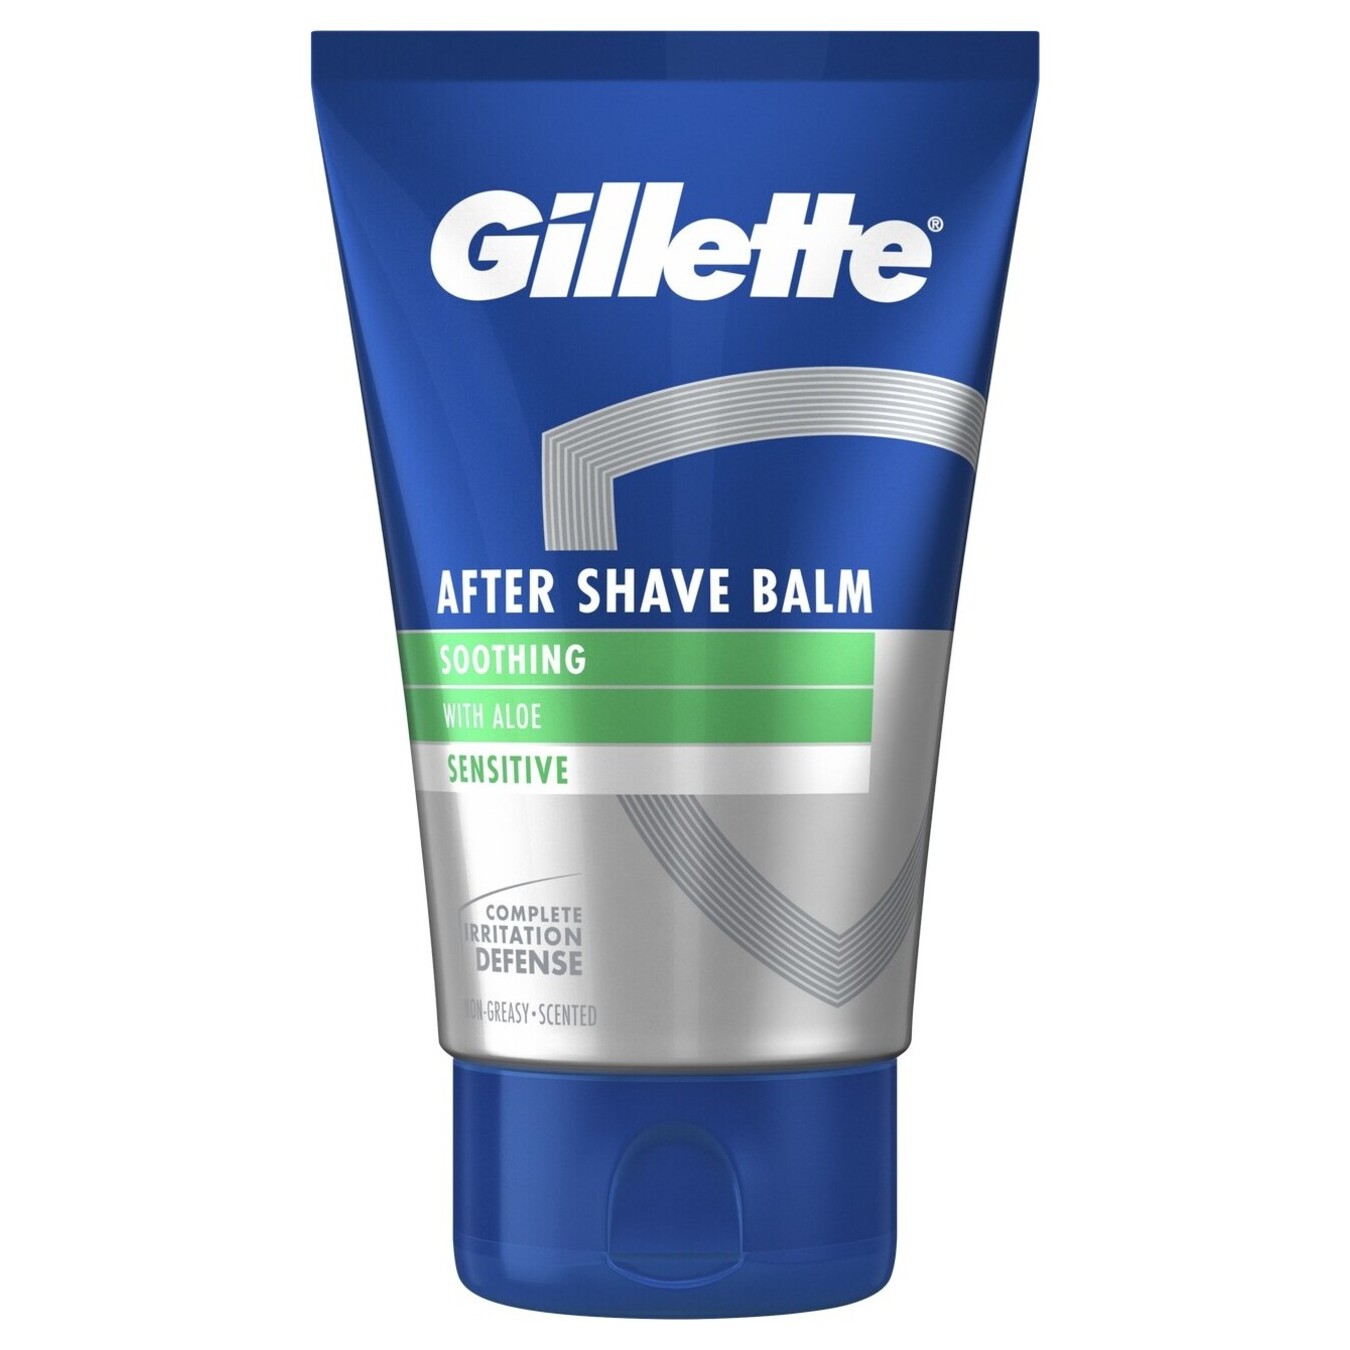 Gillette aftershave soothing balm 100ml